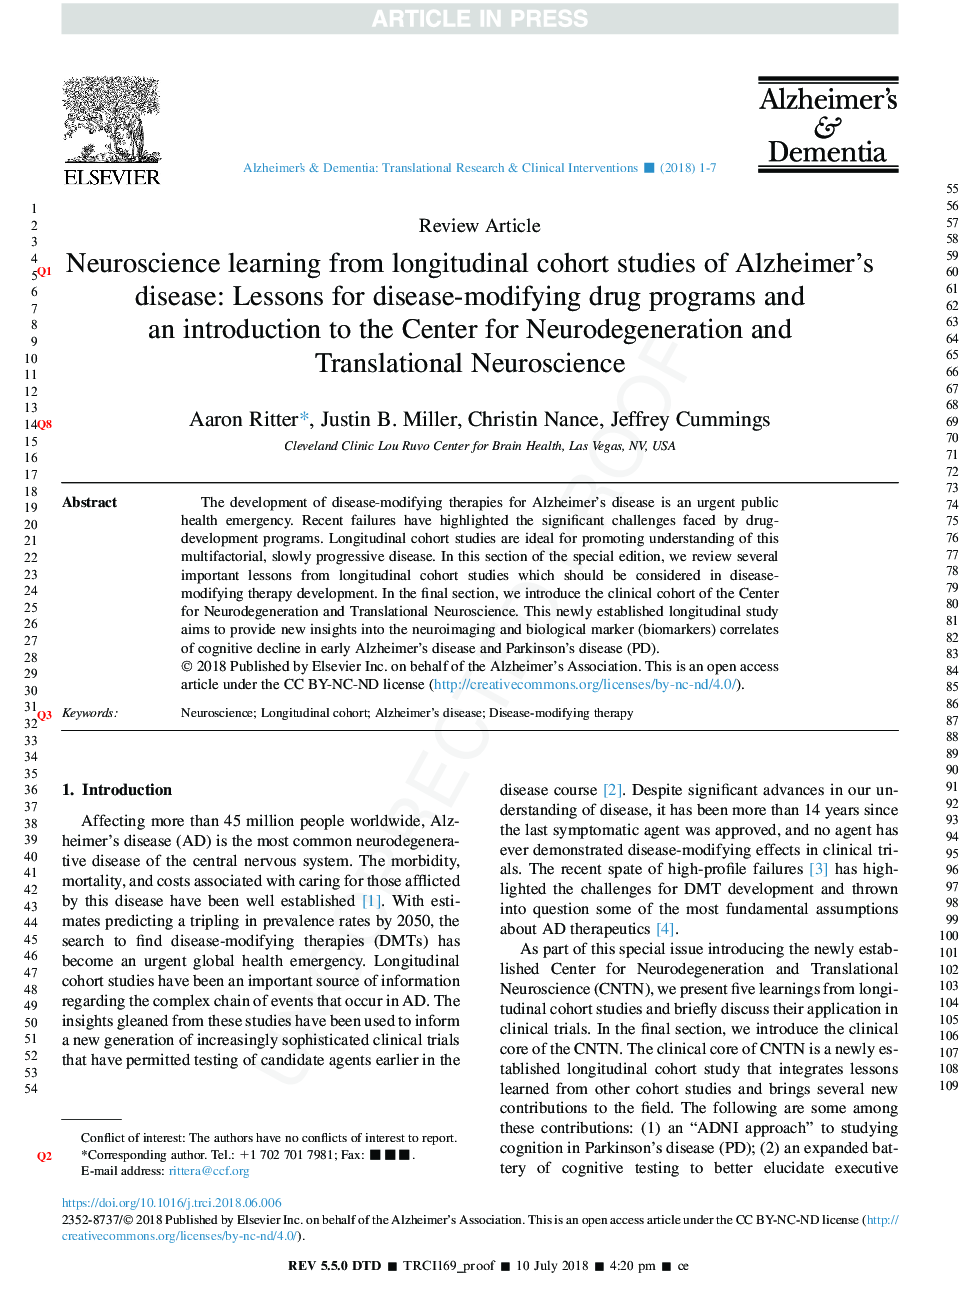 Neuroscience learning from longitudinal cohort studies of Alzheimer's disease: Lessons for disease-modifying drug programs and an introduction to the Center for Neurodegeneration and Translational Neuroscience